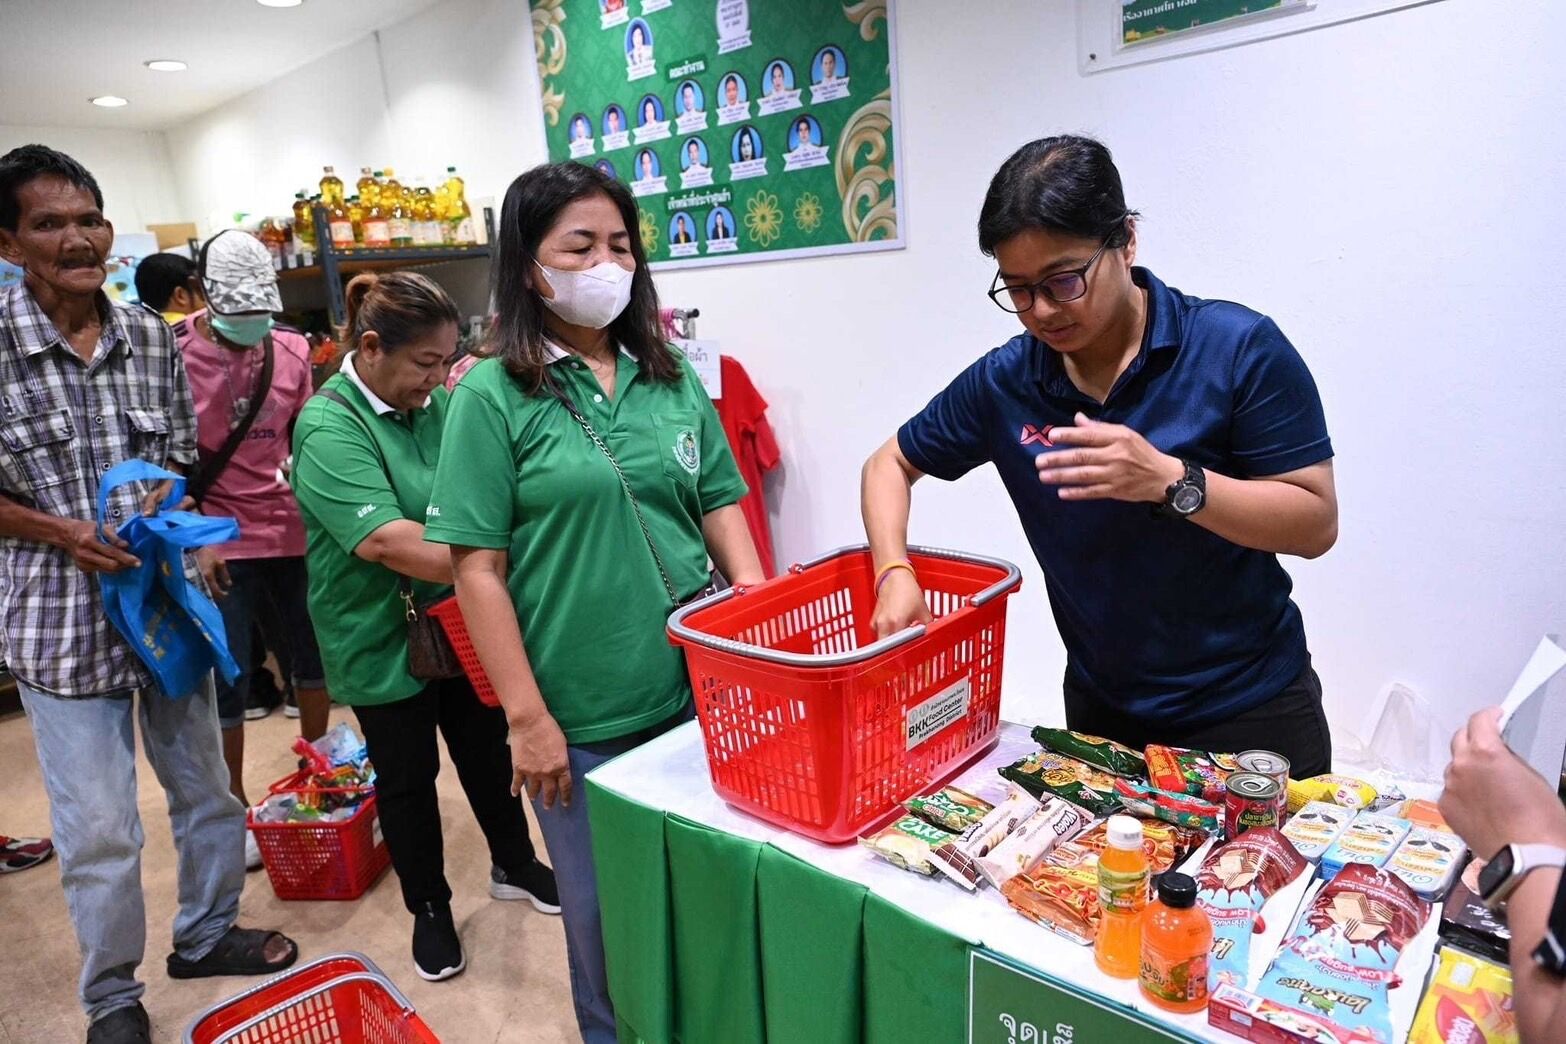 'Think of making merit, think of BKK Food Bank Center': People who give are full of merit | News by Thaiger